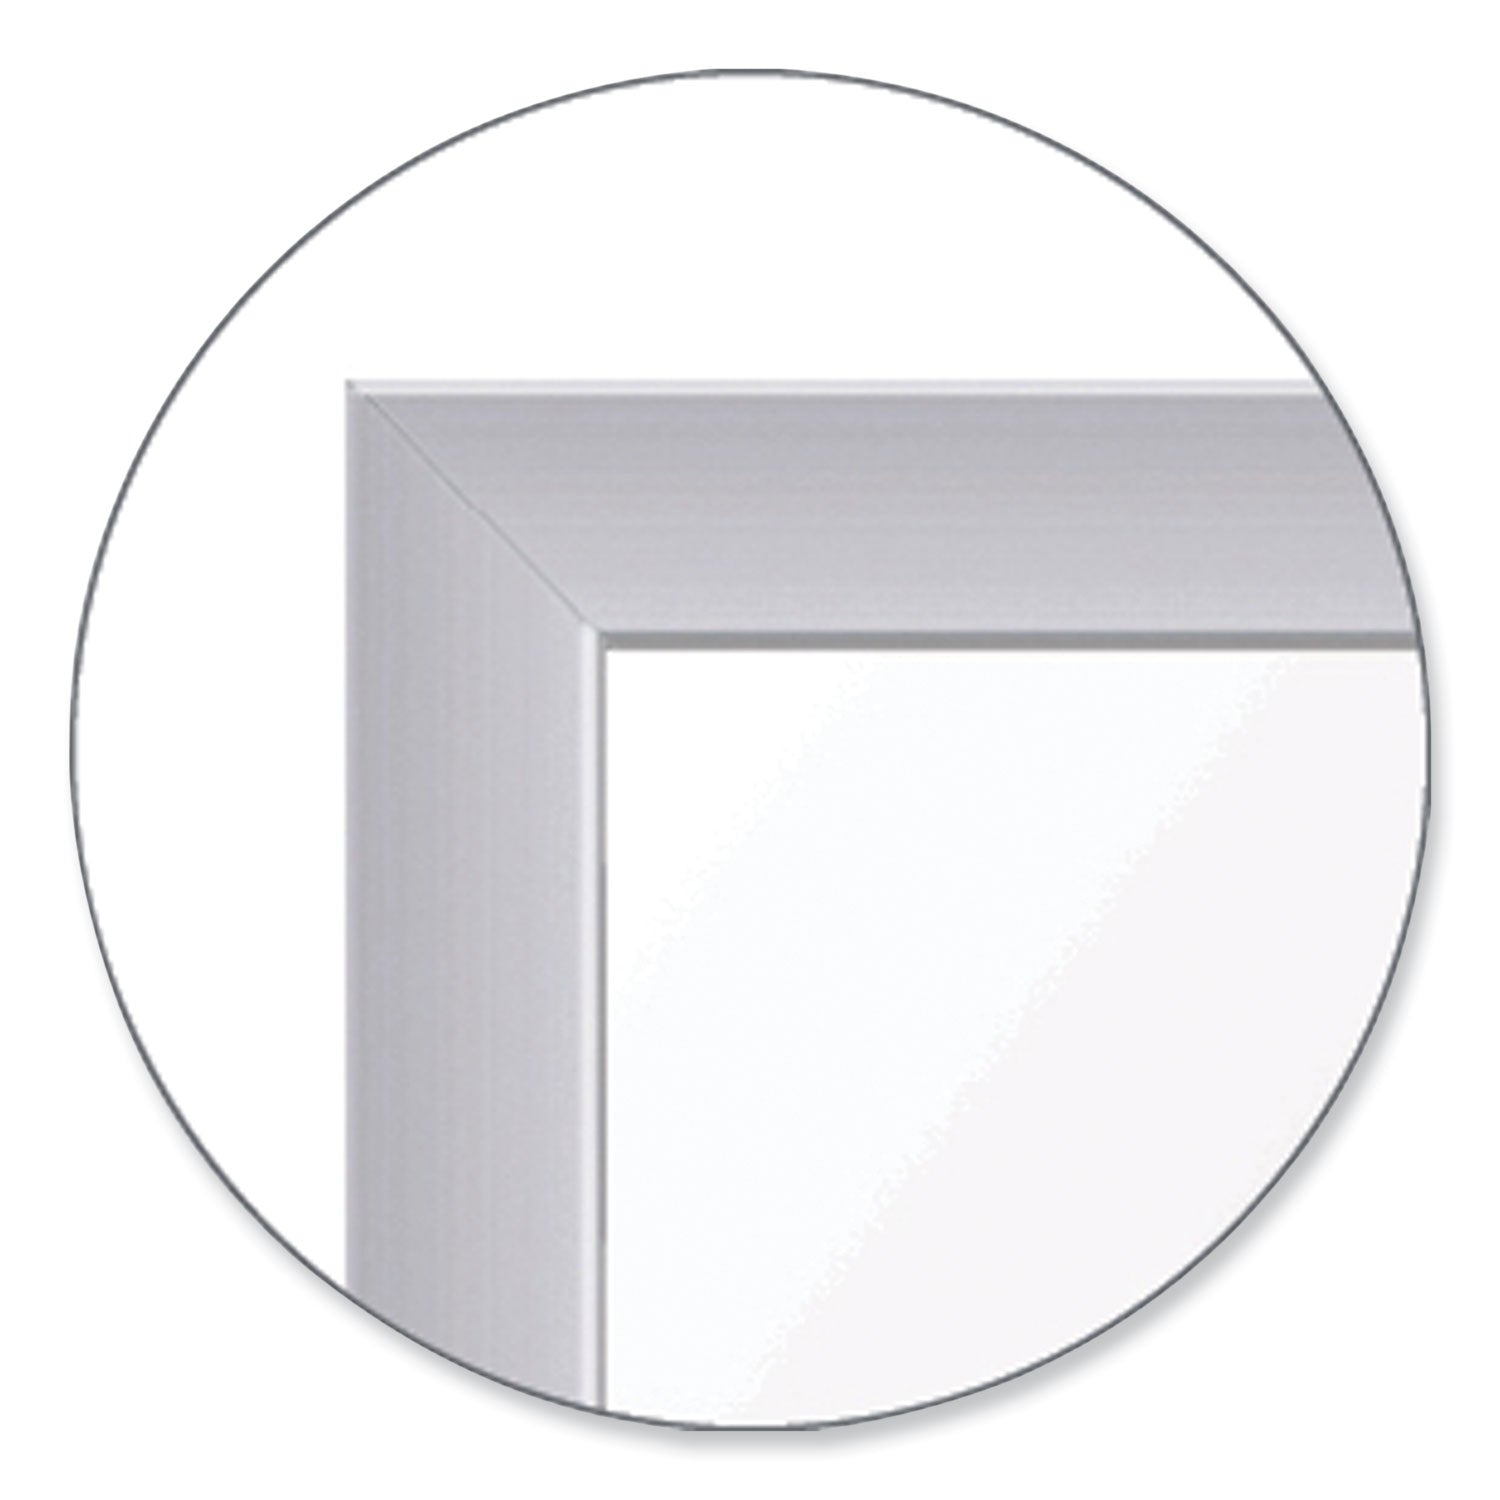 magnetic-porcelain-whiteboard-with-satin-aluminum-frame-365-x-605-white-surface-ships-in-7-10-business-days_ghem1354 - 2